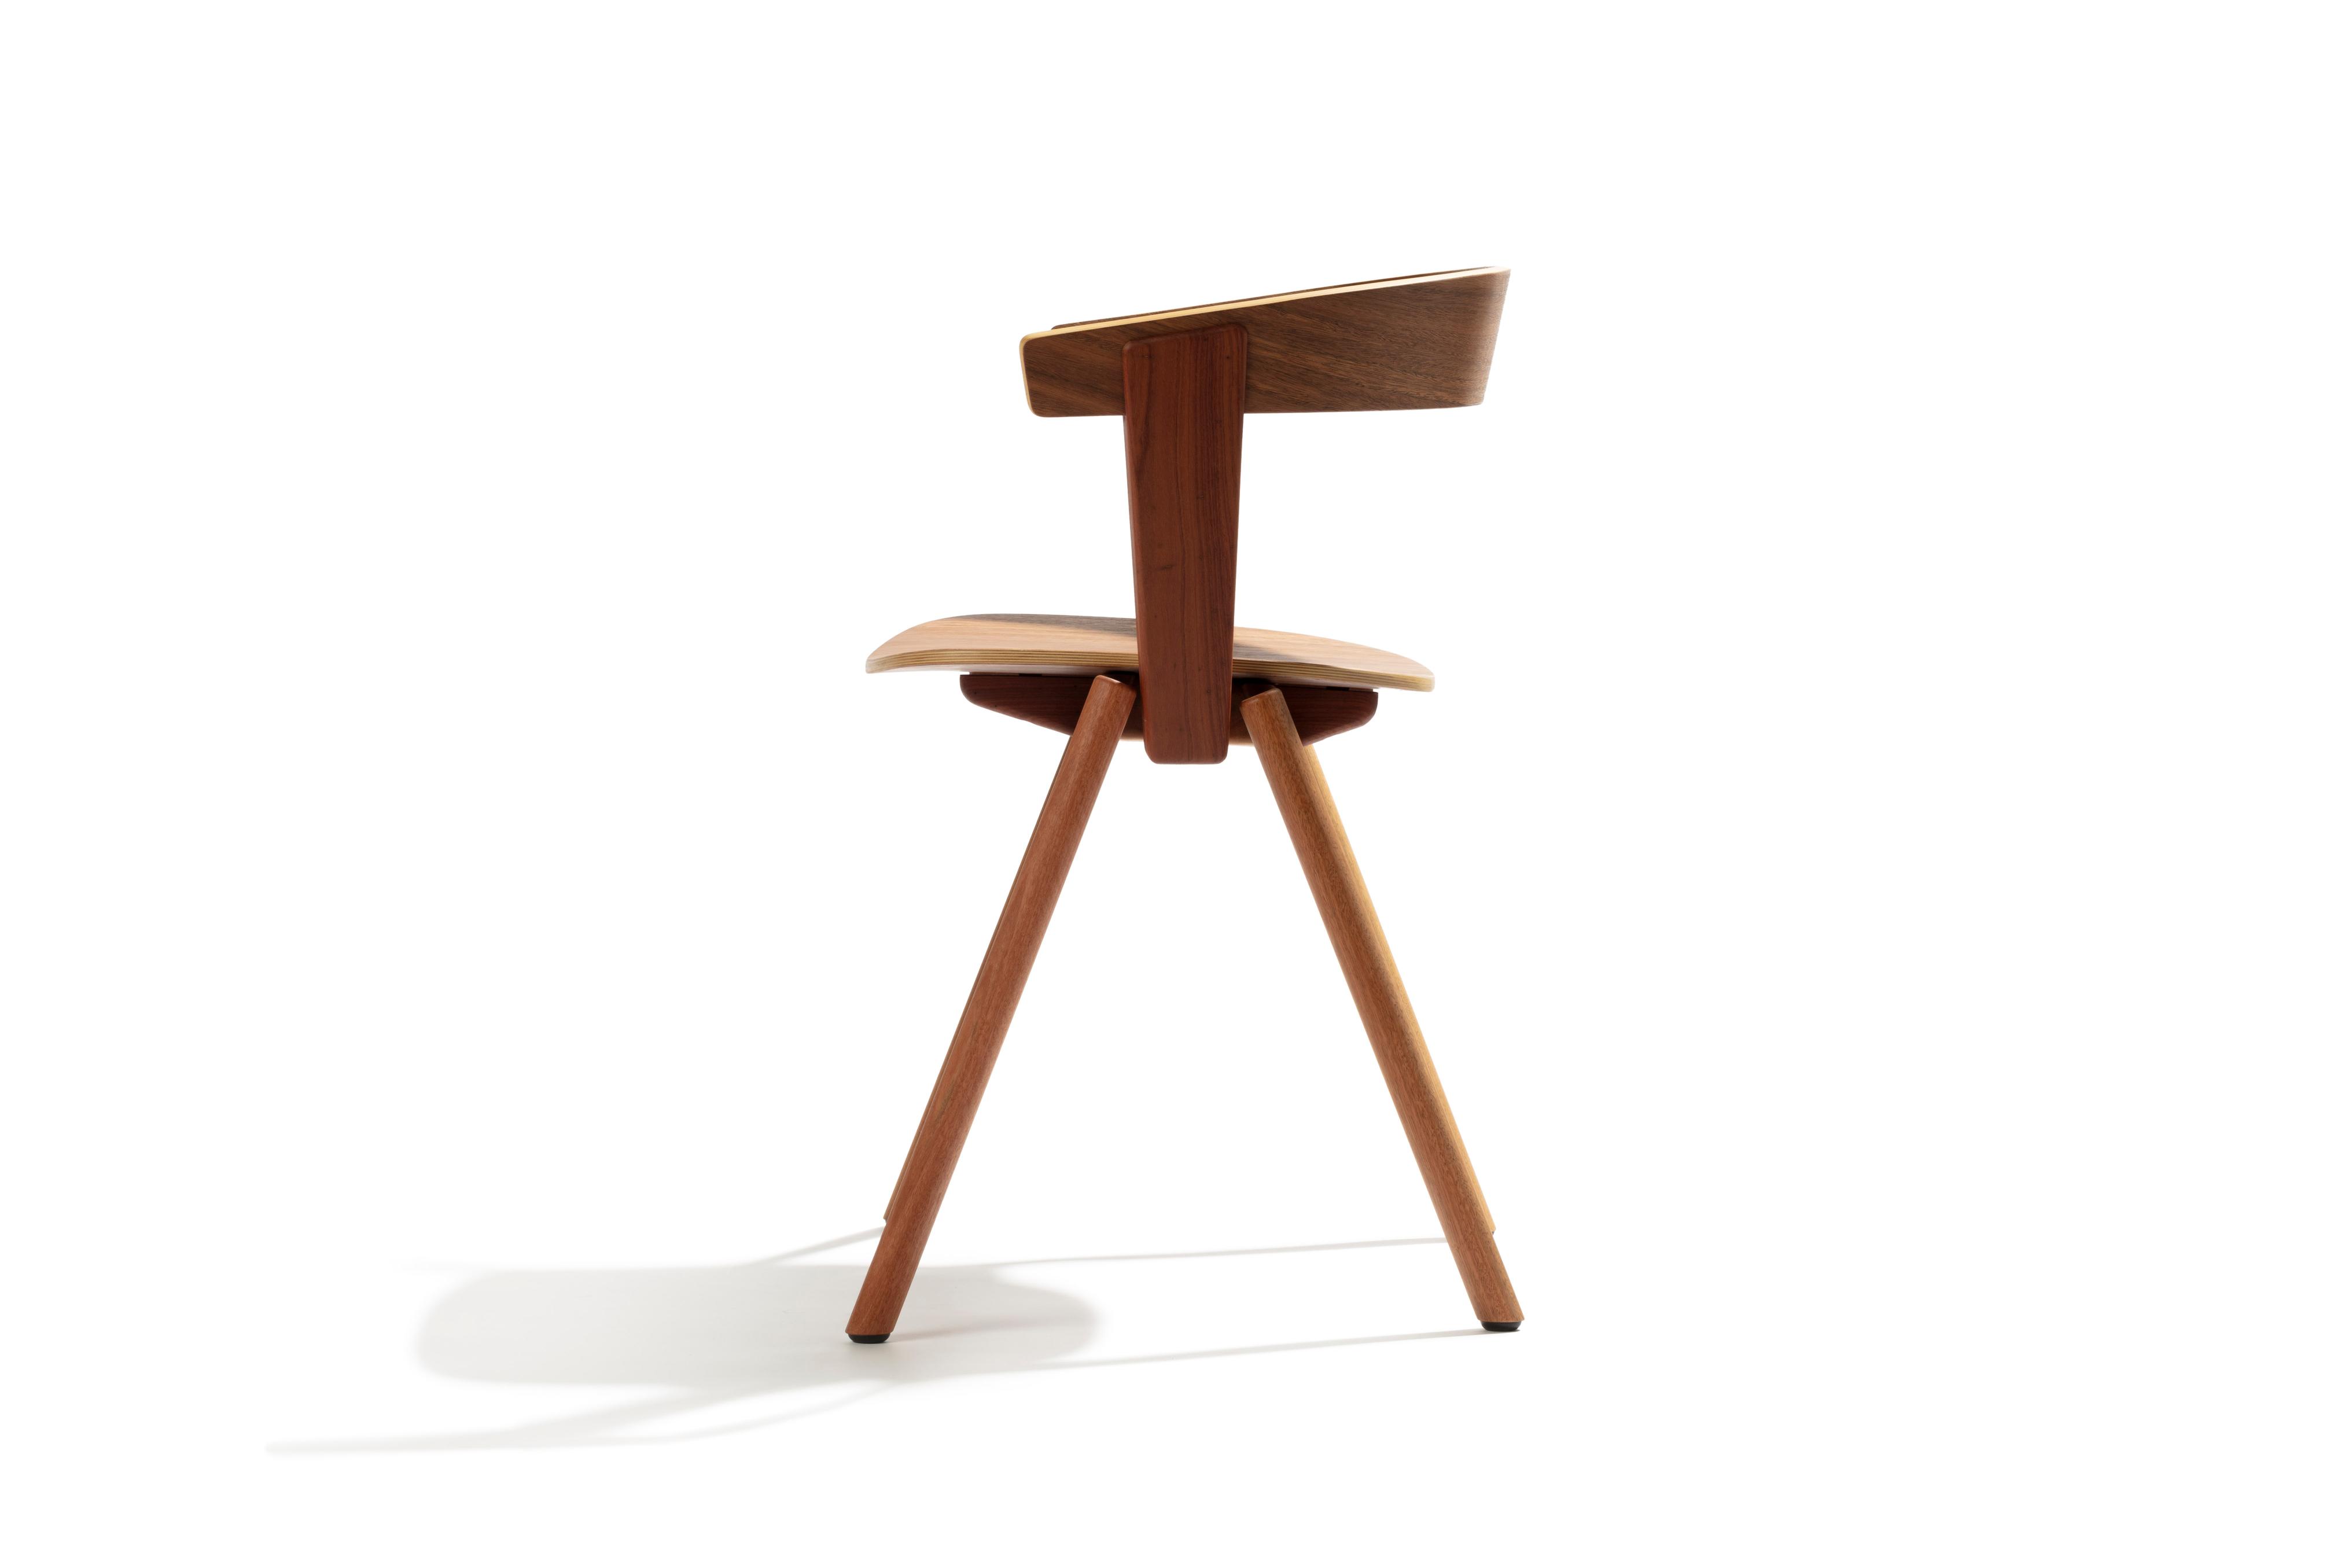 Side preview of a wooden chair with angled legs.